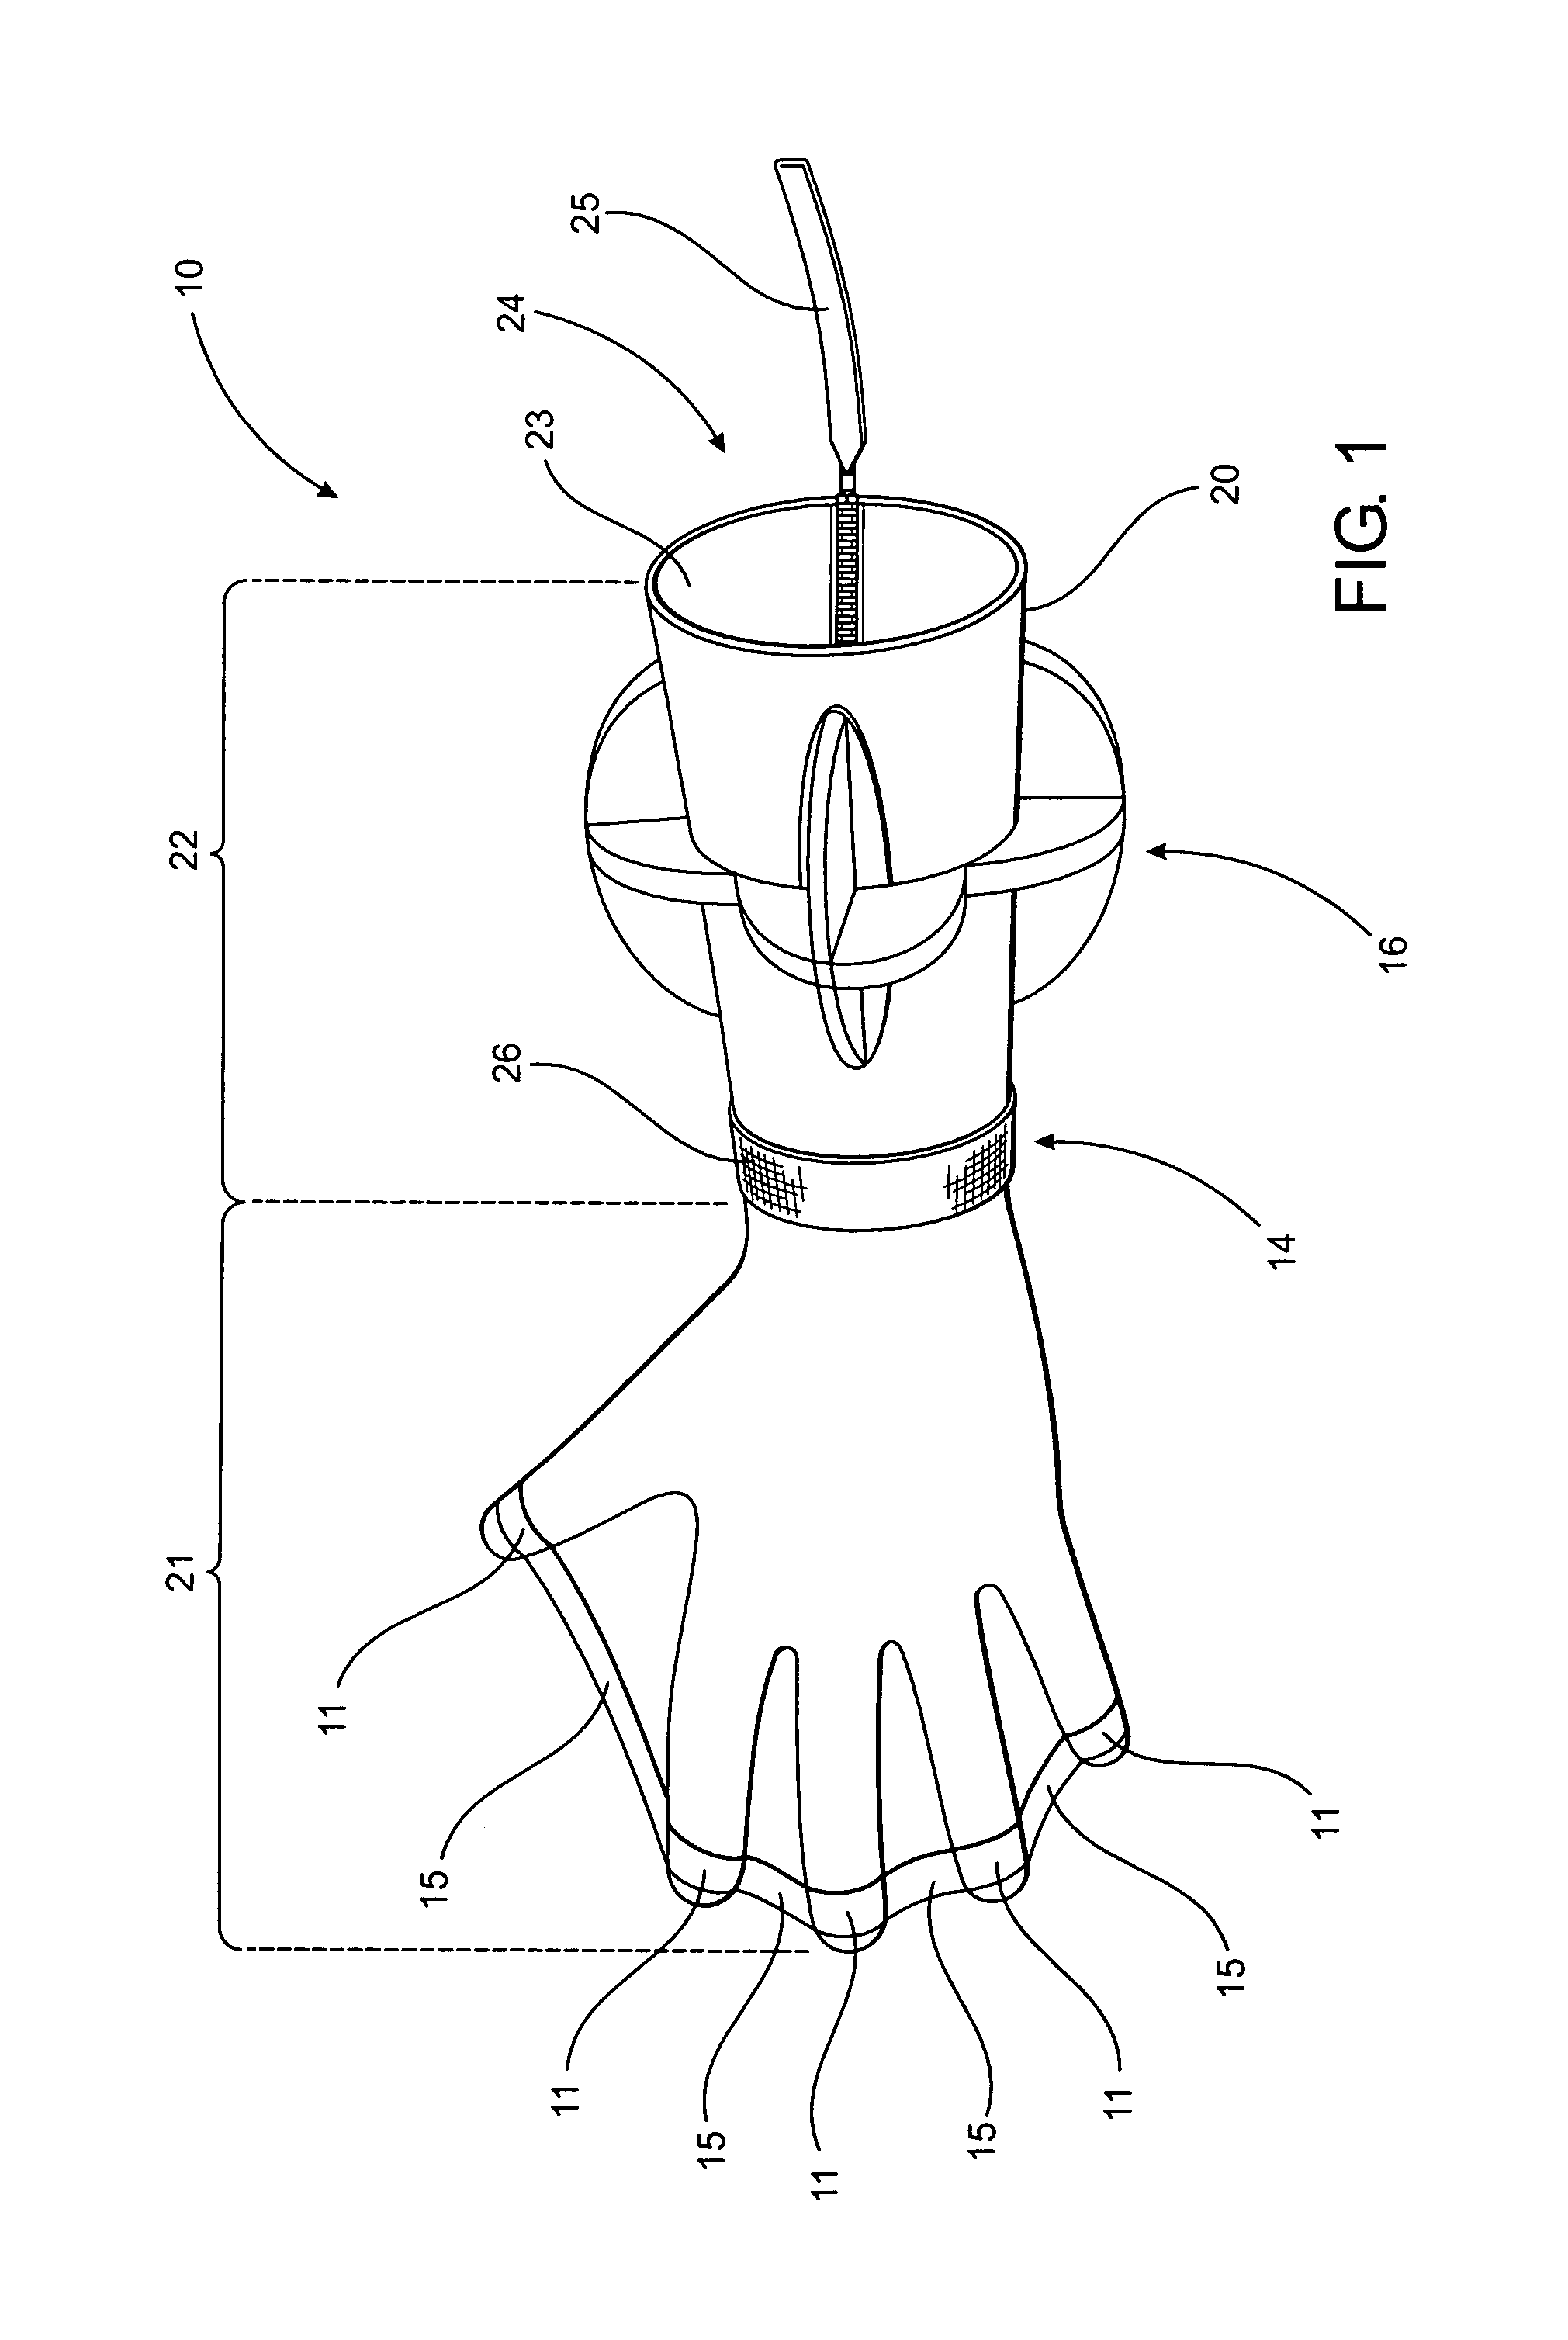 Aquatic exercise system and method